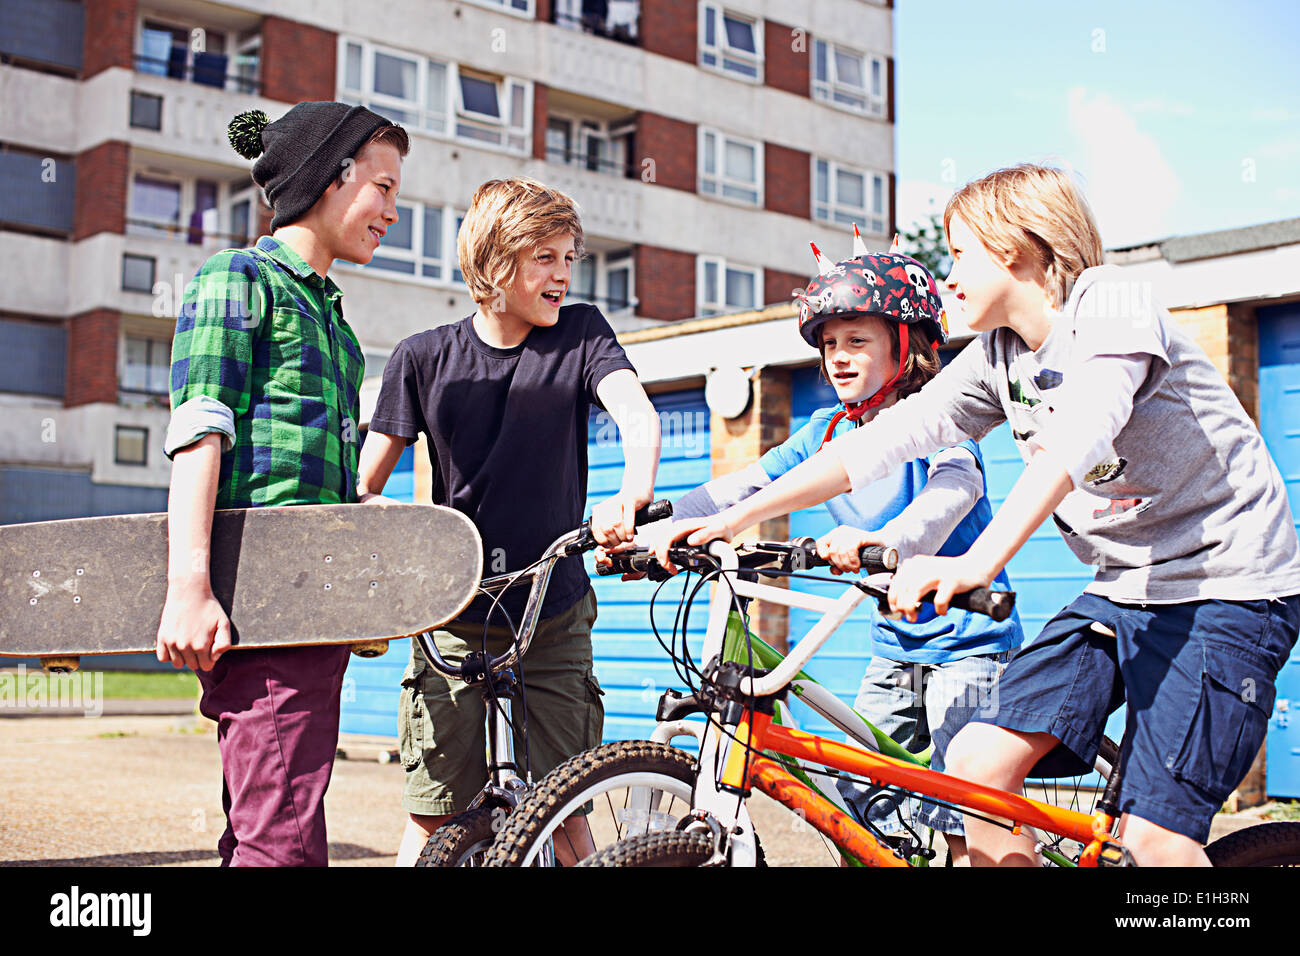 Group of boys talking with bikes and skateboard Stock Photo